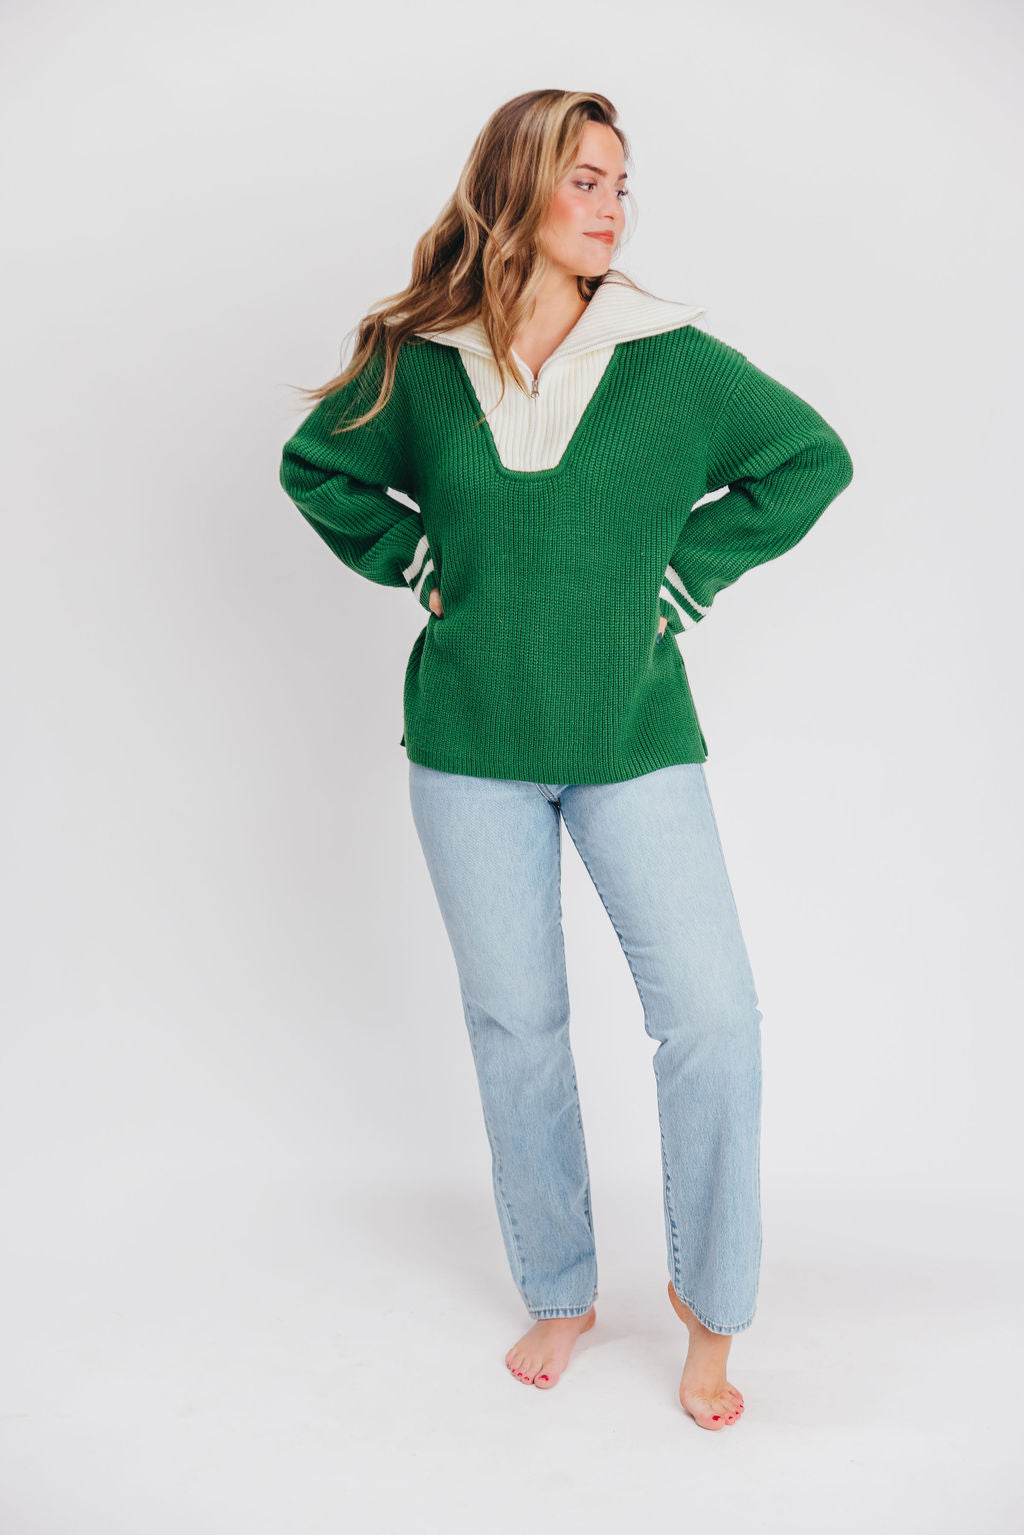 Old Money Pullover Sweater in Green/White Stripe